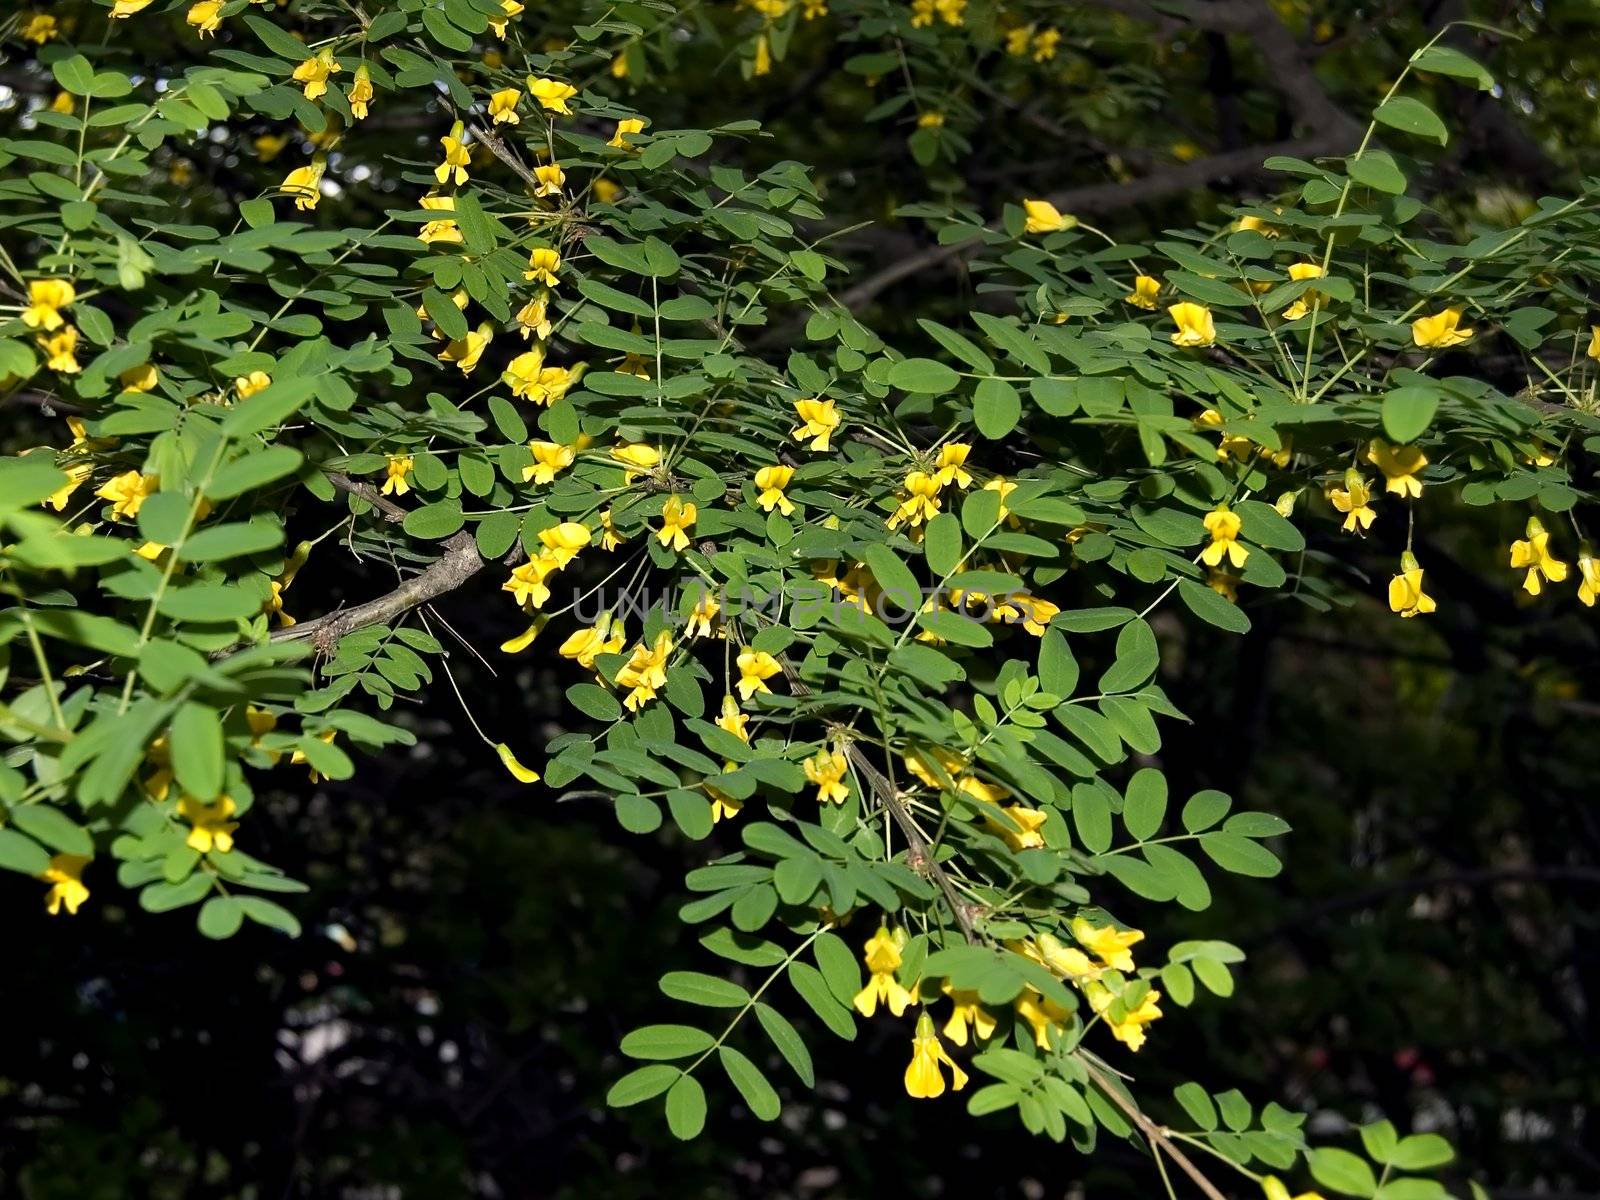 acacia branch with yellow flowers and green leaves on a black background